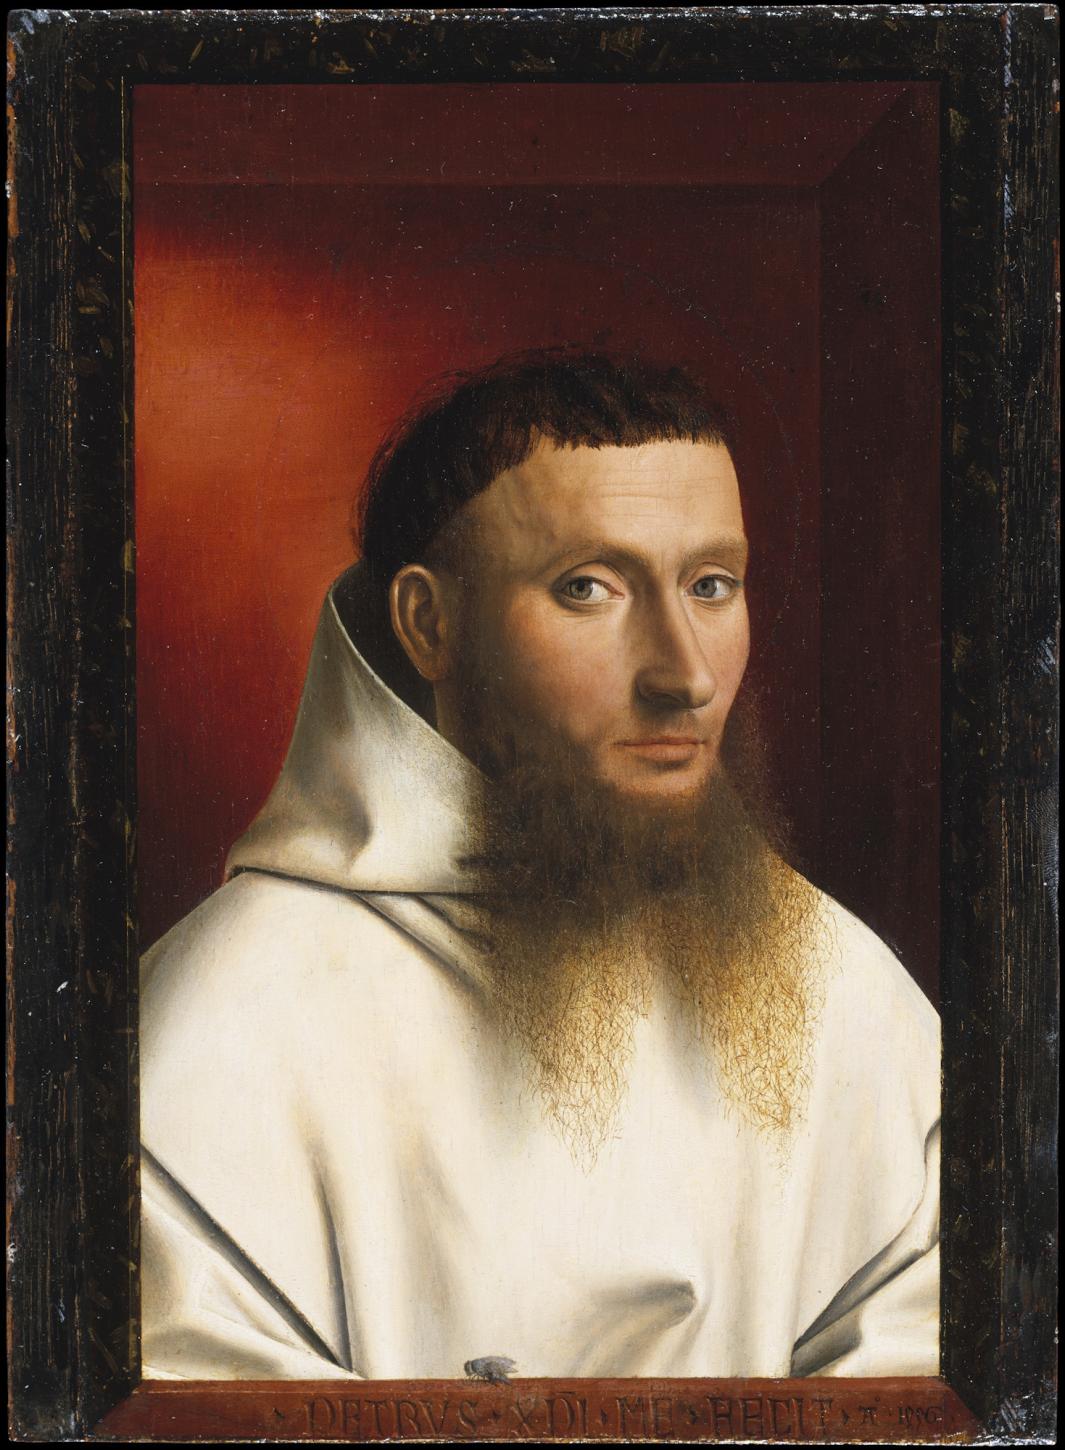 oil painting on wood of monk wearing hooded white robe, with long beard